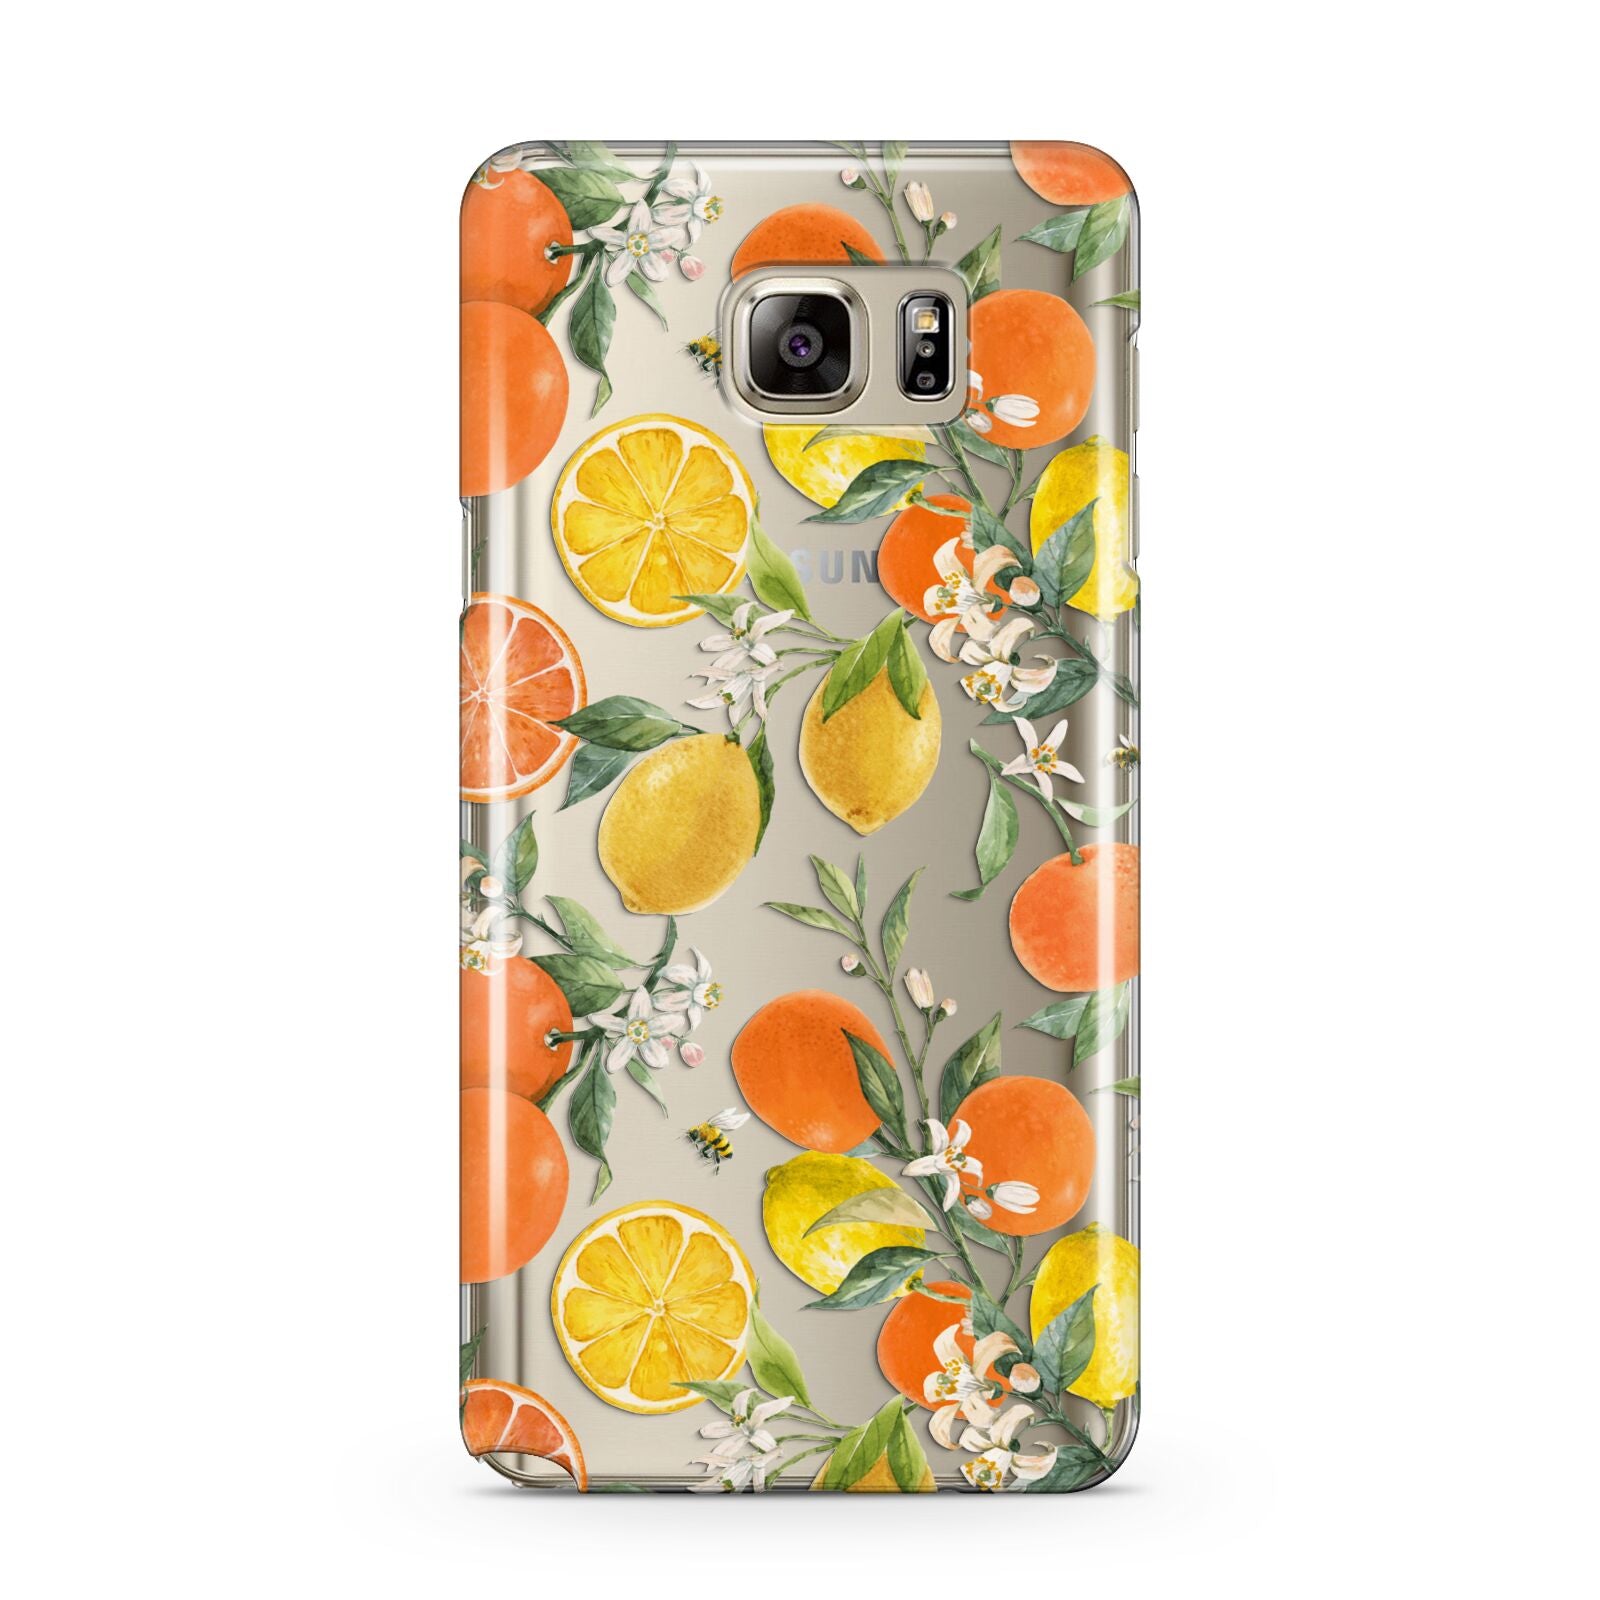 Lemons and Oranges Samsung Galaxy Note 5 Case